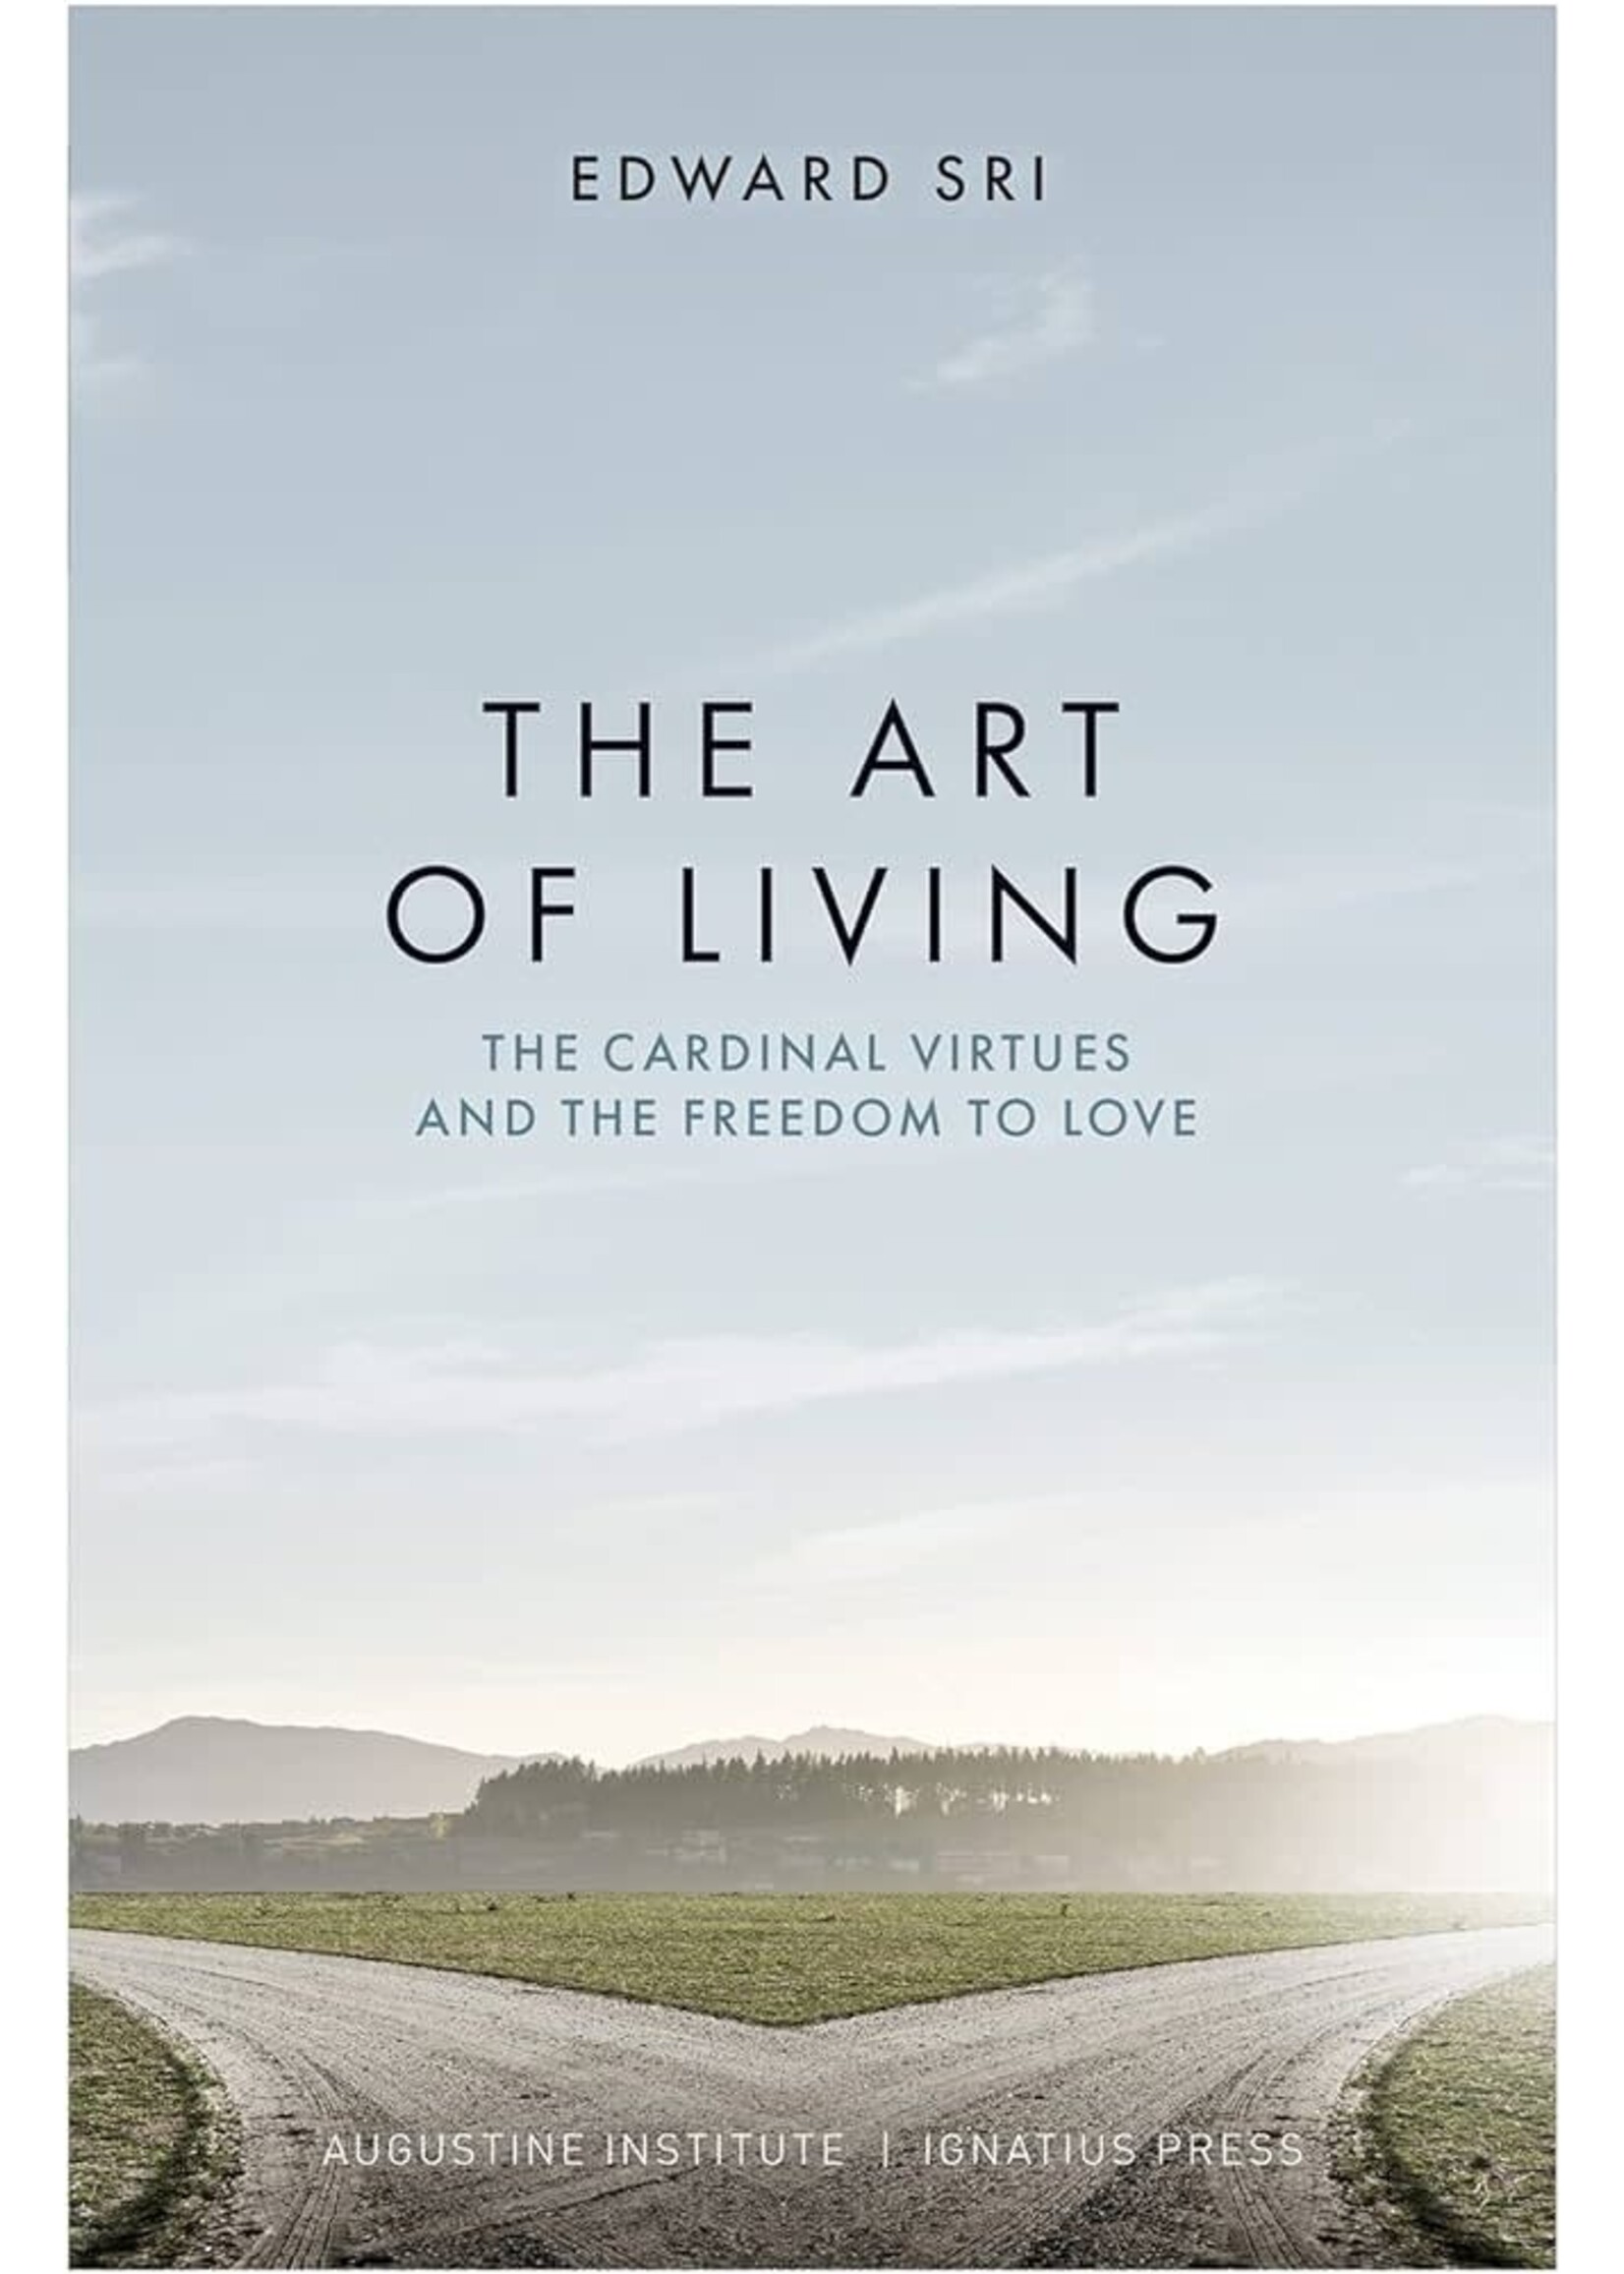 The Art of Living: The Cardinal Virtues & the Freedom to Love